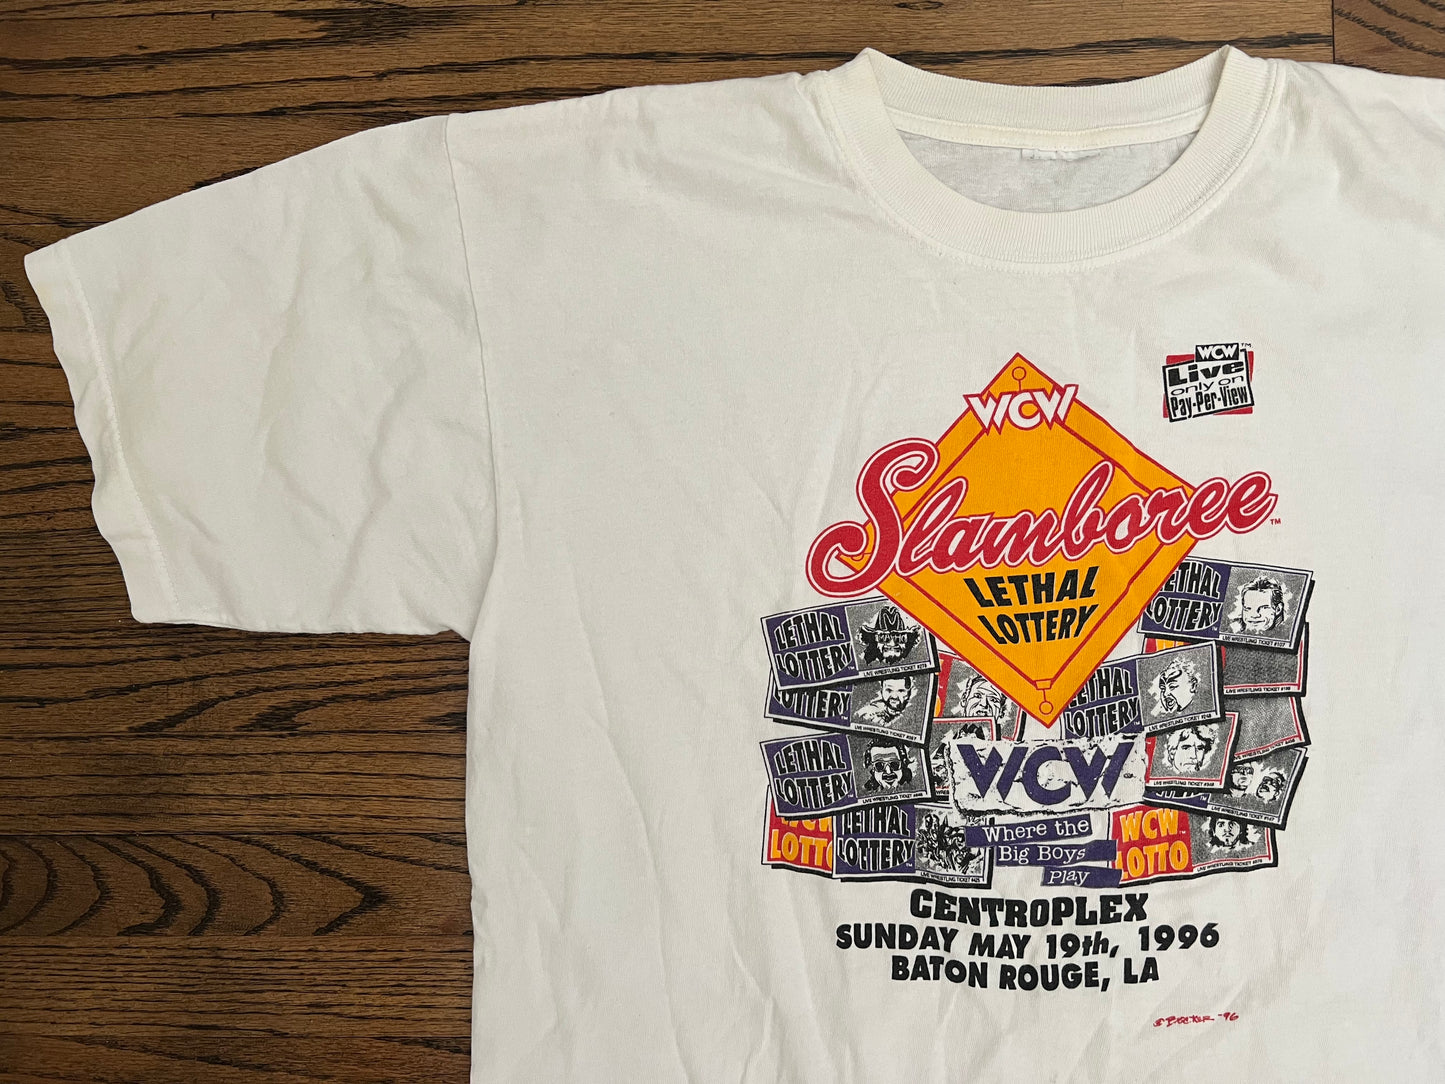 1996 WCW Slamboree shirt featuring Kevin Sullivan, Arn Anderson, The Nasty Boys, Ric Flair, Sting, The Road Warriors, Jimmy Hart, Randy Savage, Lex Luger and The Giant